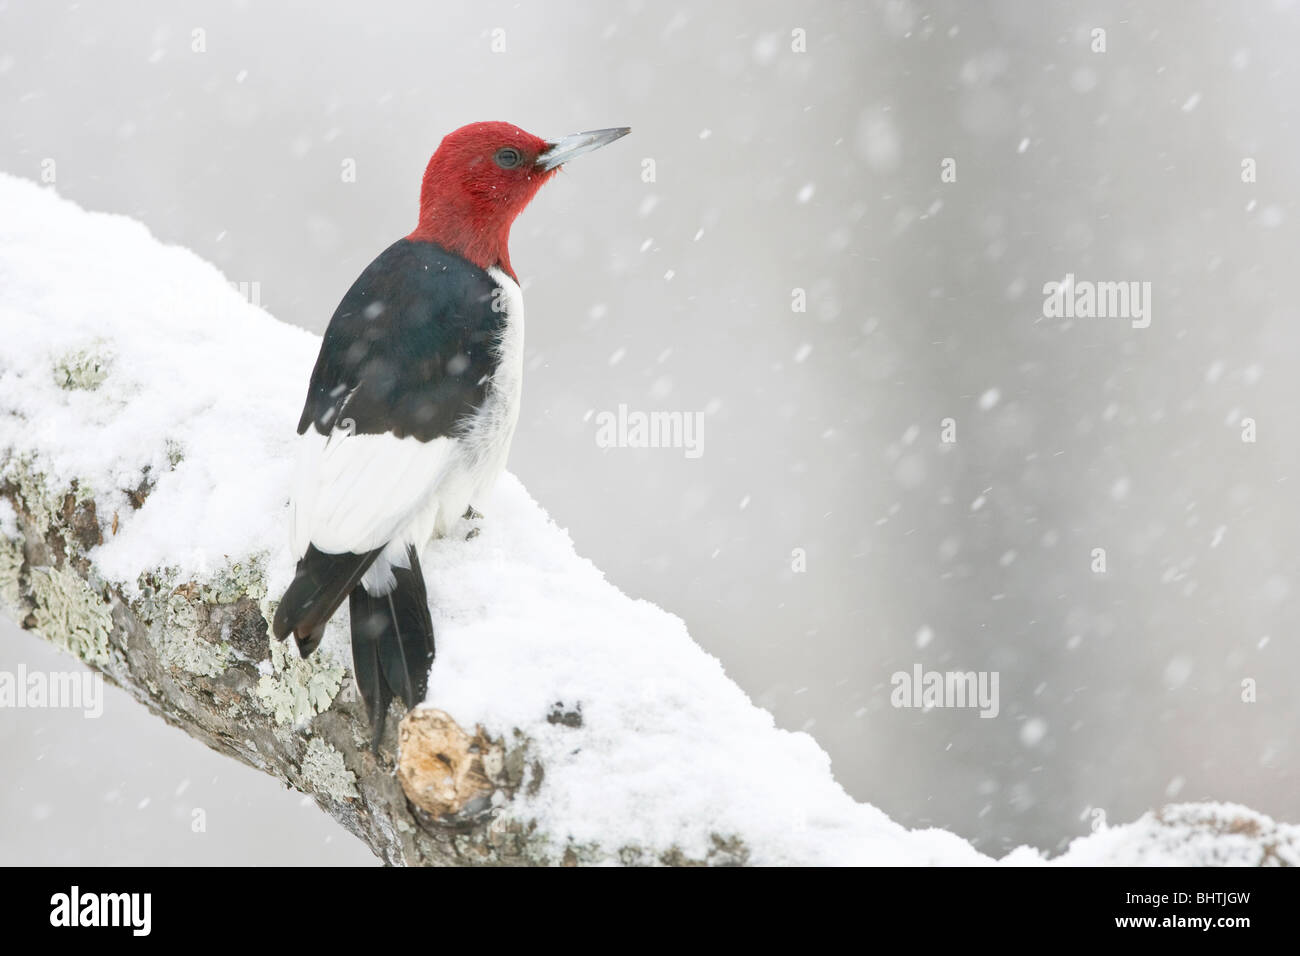 Red-headed Woodpecker perched in Snow Stock Photo